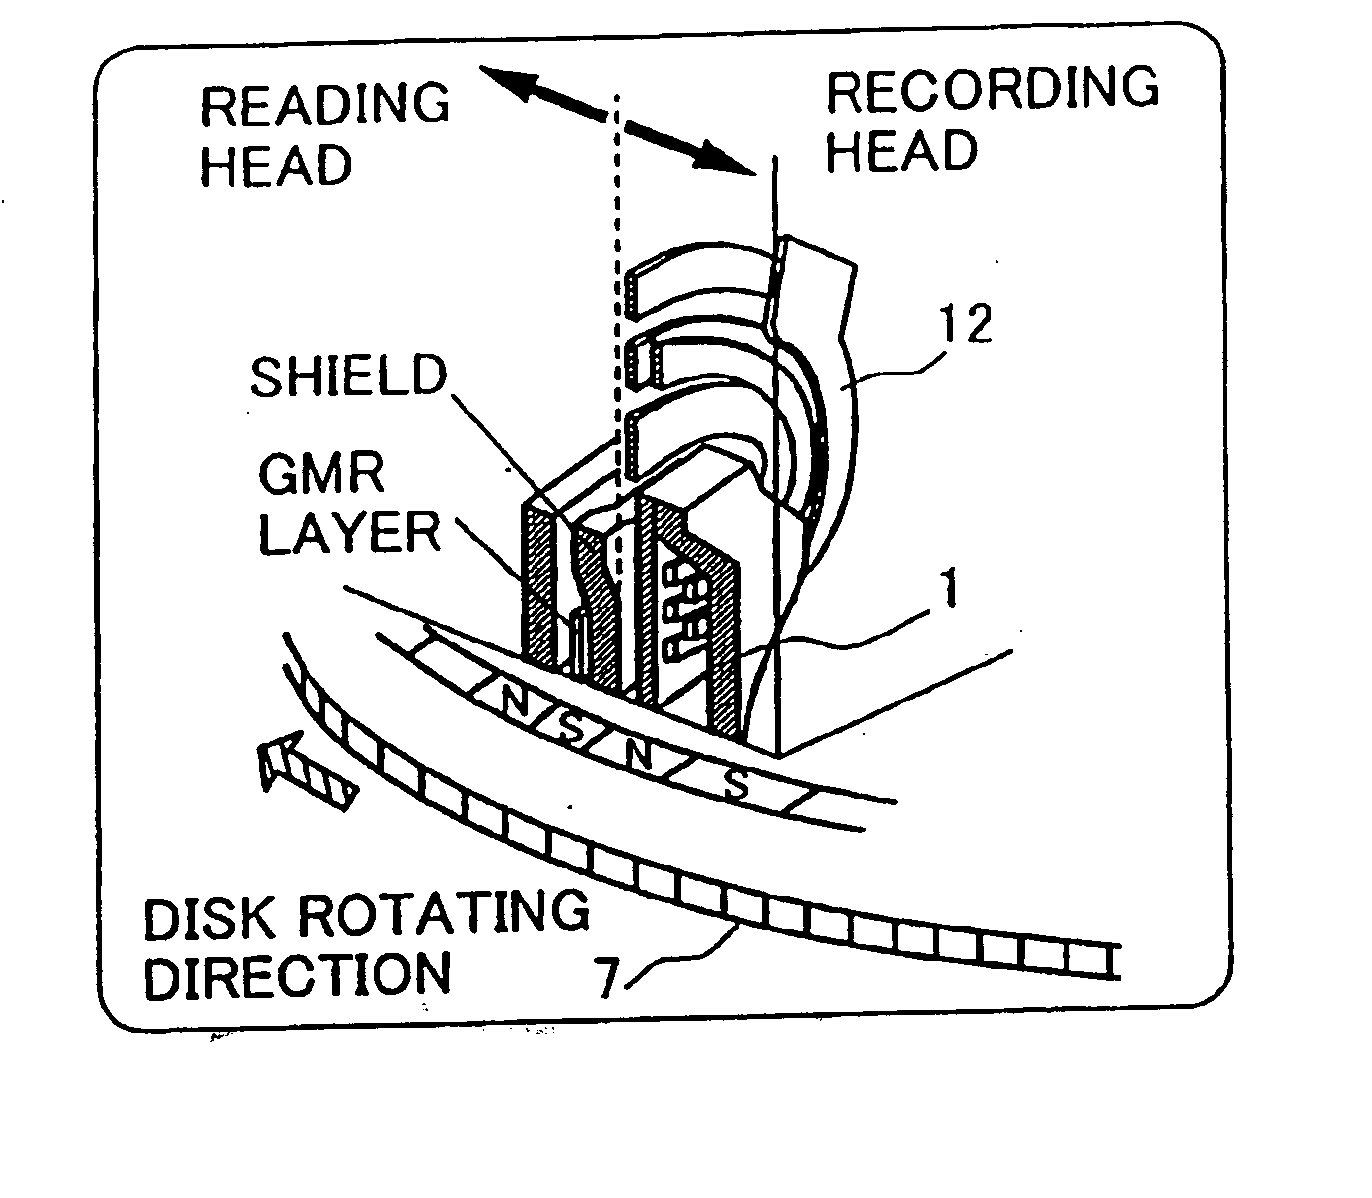 Single pole type recording head with tapered edges